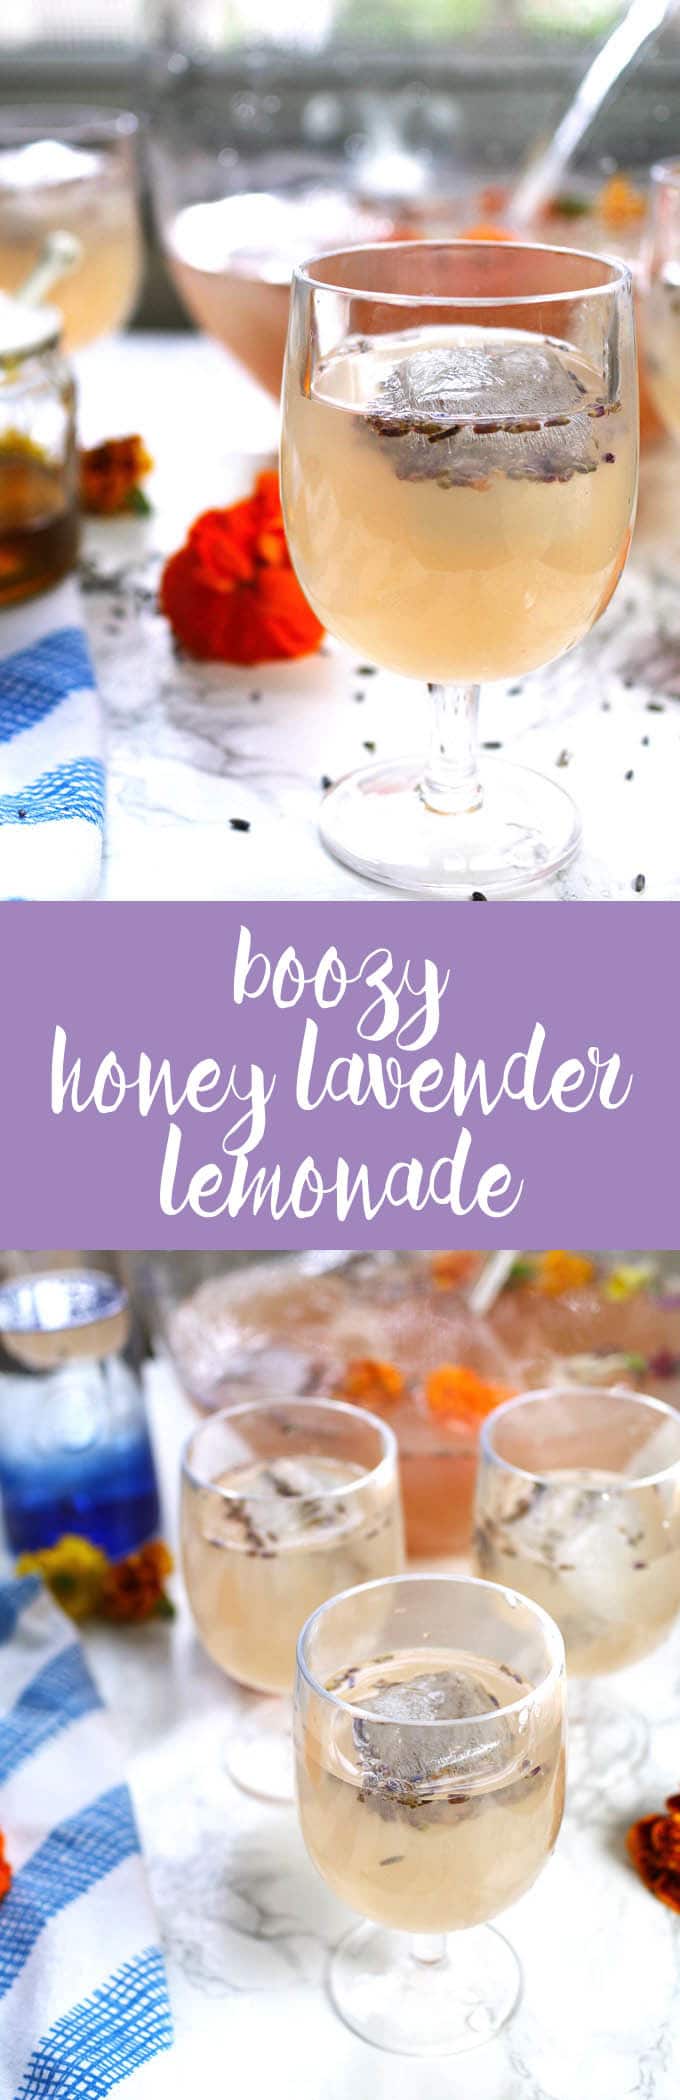 This boozy honey lavender lemonade is a great drink for brunches. It is also the PERFECT punch for spring and summer bridal or baby showers. | honeyandbirch.com